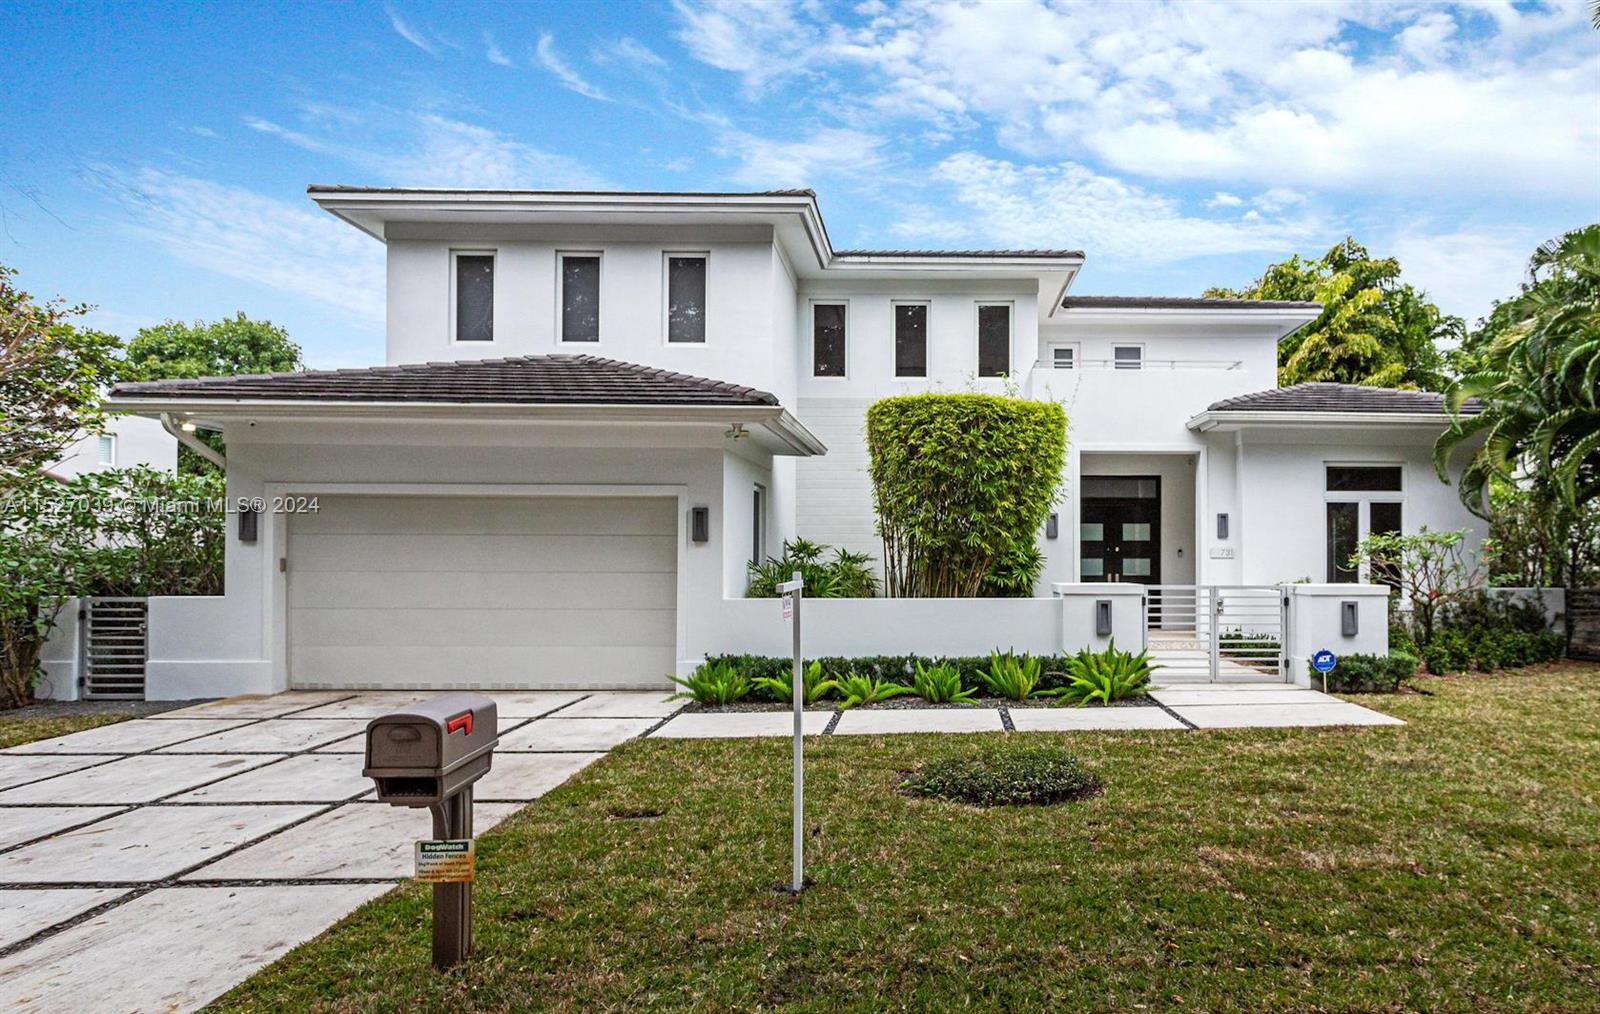 Stunning Coral Gables 2-story dream home built in 2015 boasts five impressive bedrooms, each with its own BA (5/5.5). It has high ceilings and all-impact windows with beautiful tile flooring that exudes elegance and charm. The kitchen features granite counters and top-of-the-line Wolf & Miele appliances. An elevator that effortlessly transports you between floors. The master suite overlooks a huge balcony. The two-car garage provides ample vehicle space, while the generator ensures peace of mind during power outages. This home has it all, combining luxury, functionality, and style in one remarkable package. Don't miss the opportunity to make this Coral Gables gem your forever home. Schedule a showing today and experience the epitome of modern living!